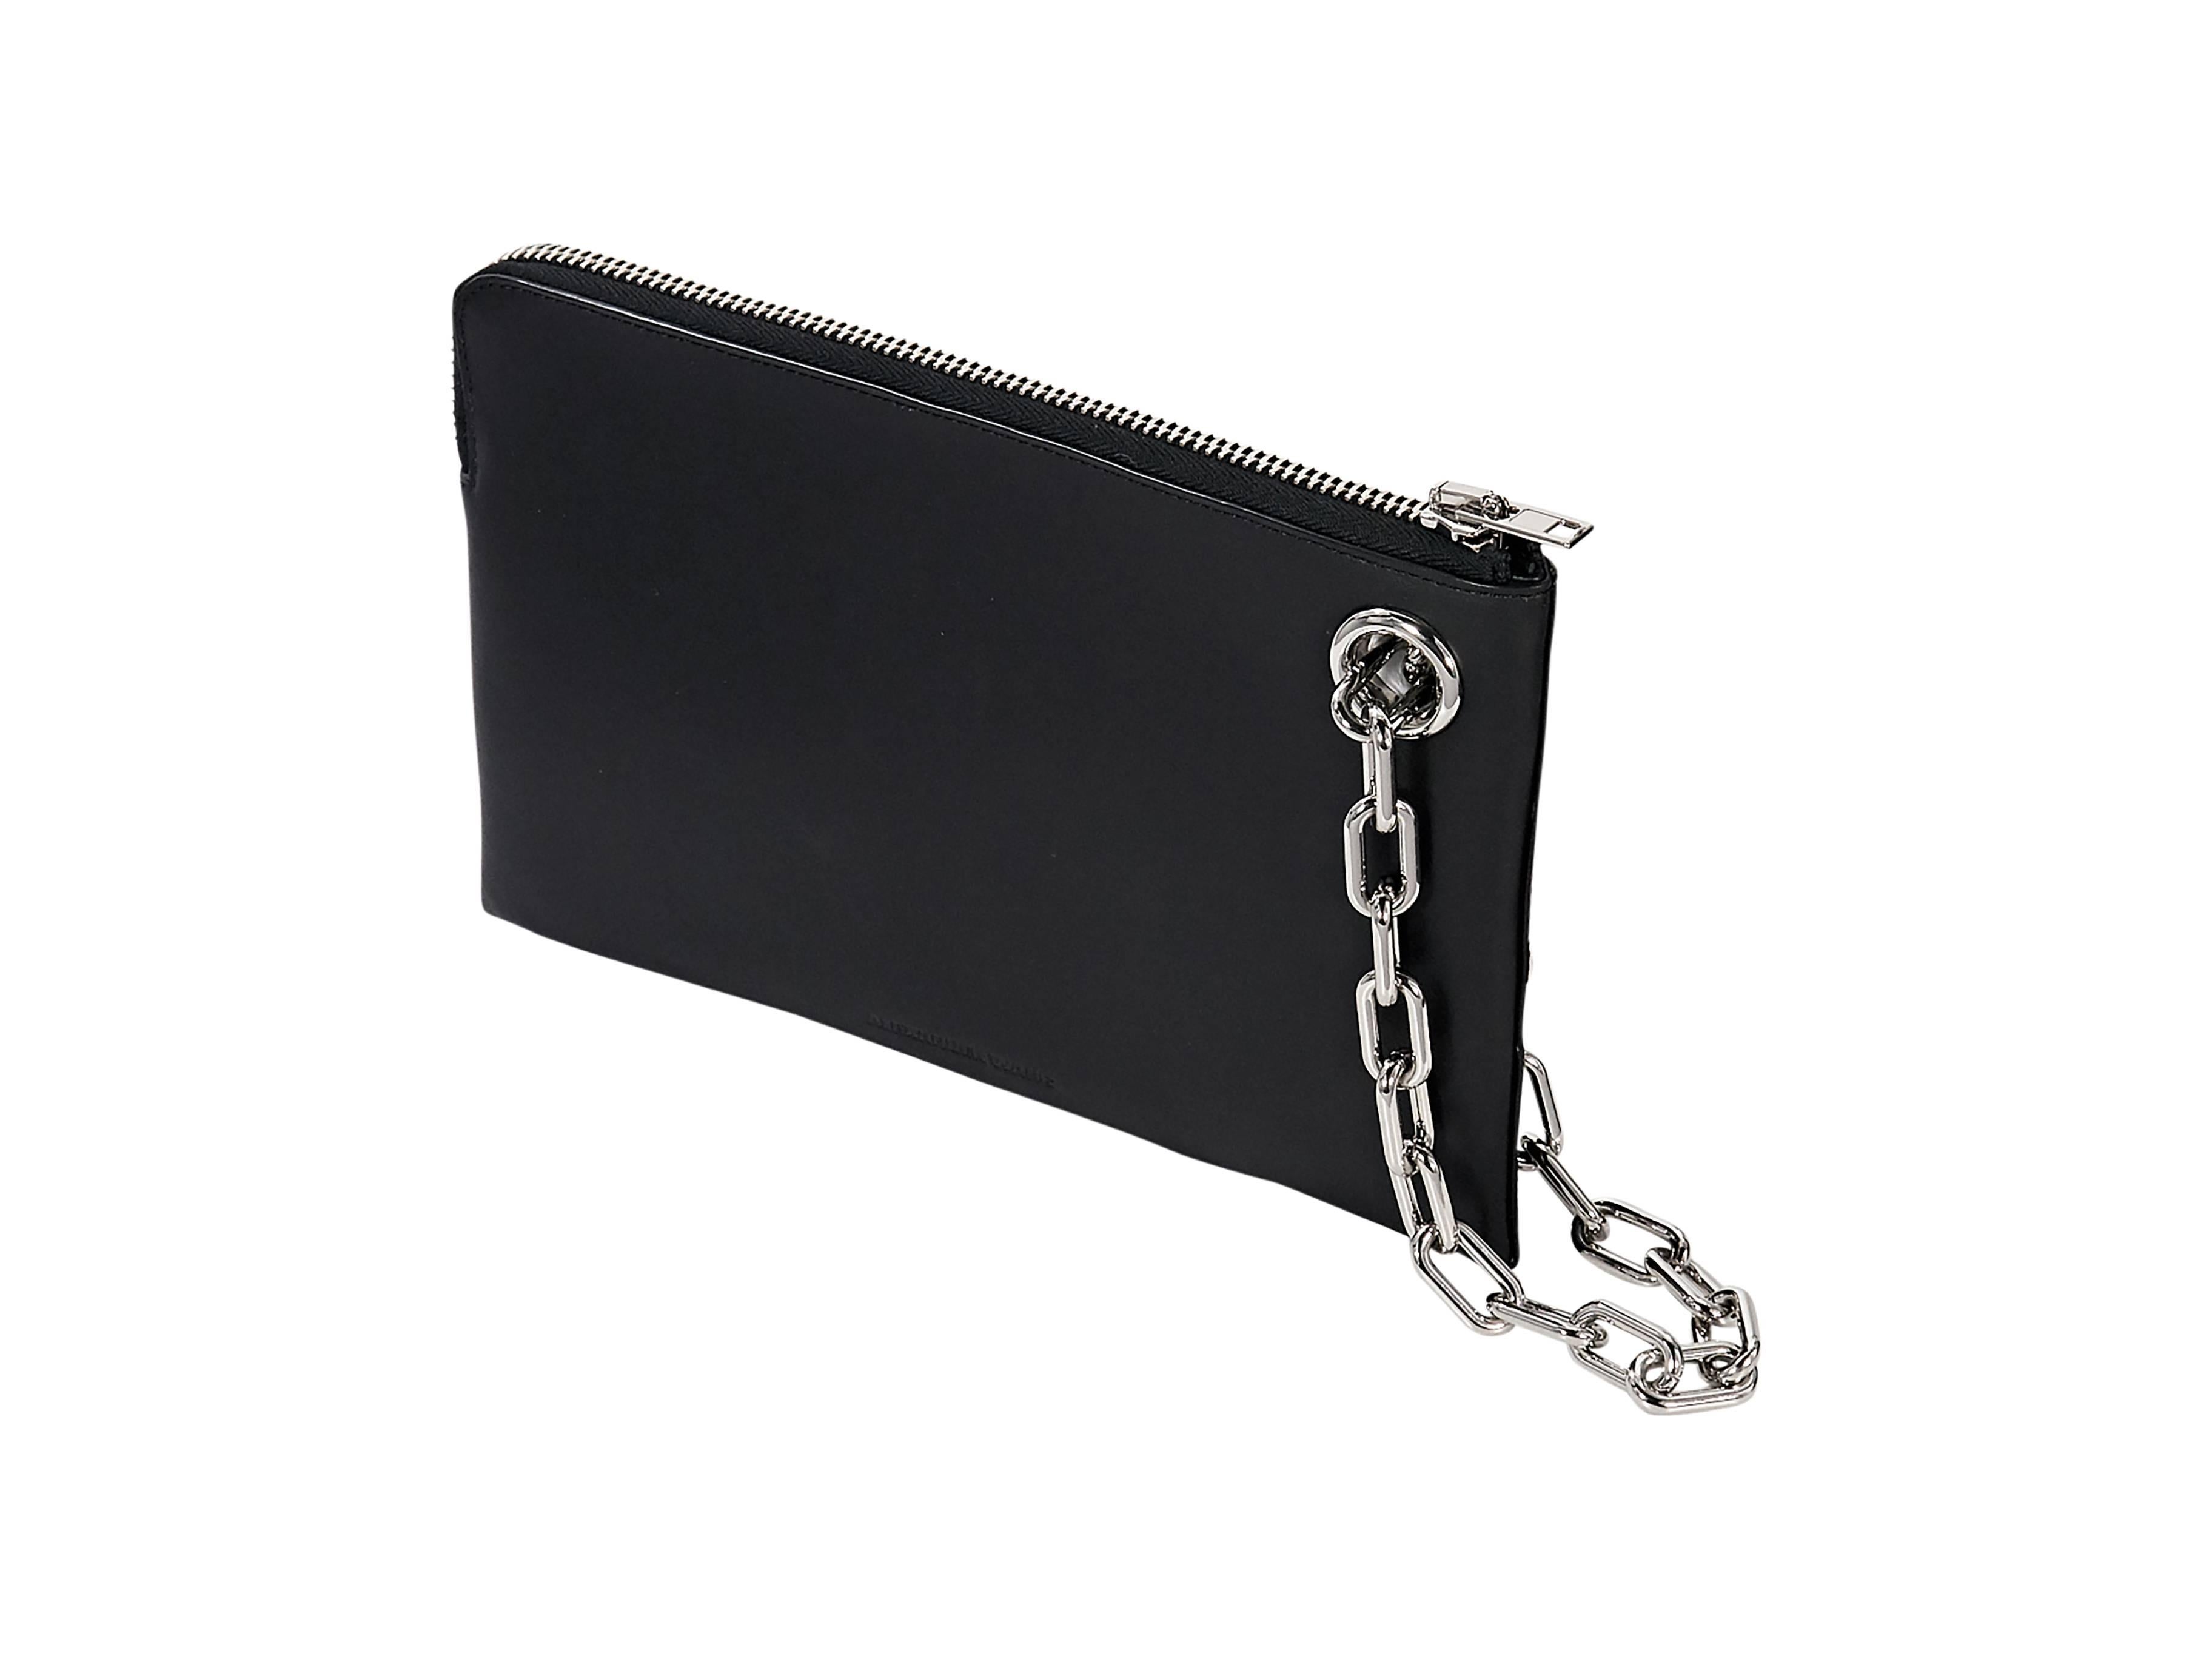 Product details: Black leather clutch by Alexander Wang. Silvertone hardware. Chain wristlet. Top zip closure. Exterior zip pocket. Lined interior with inner zip pocket. 
Condition: Very good. 
Est. Retail $ 730.00